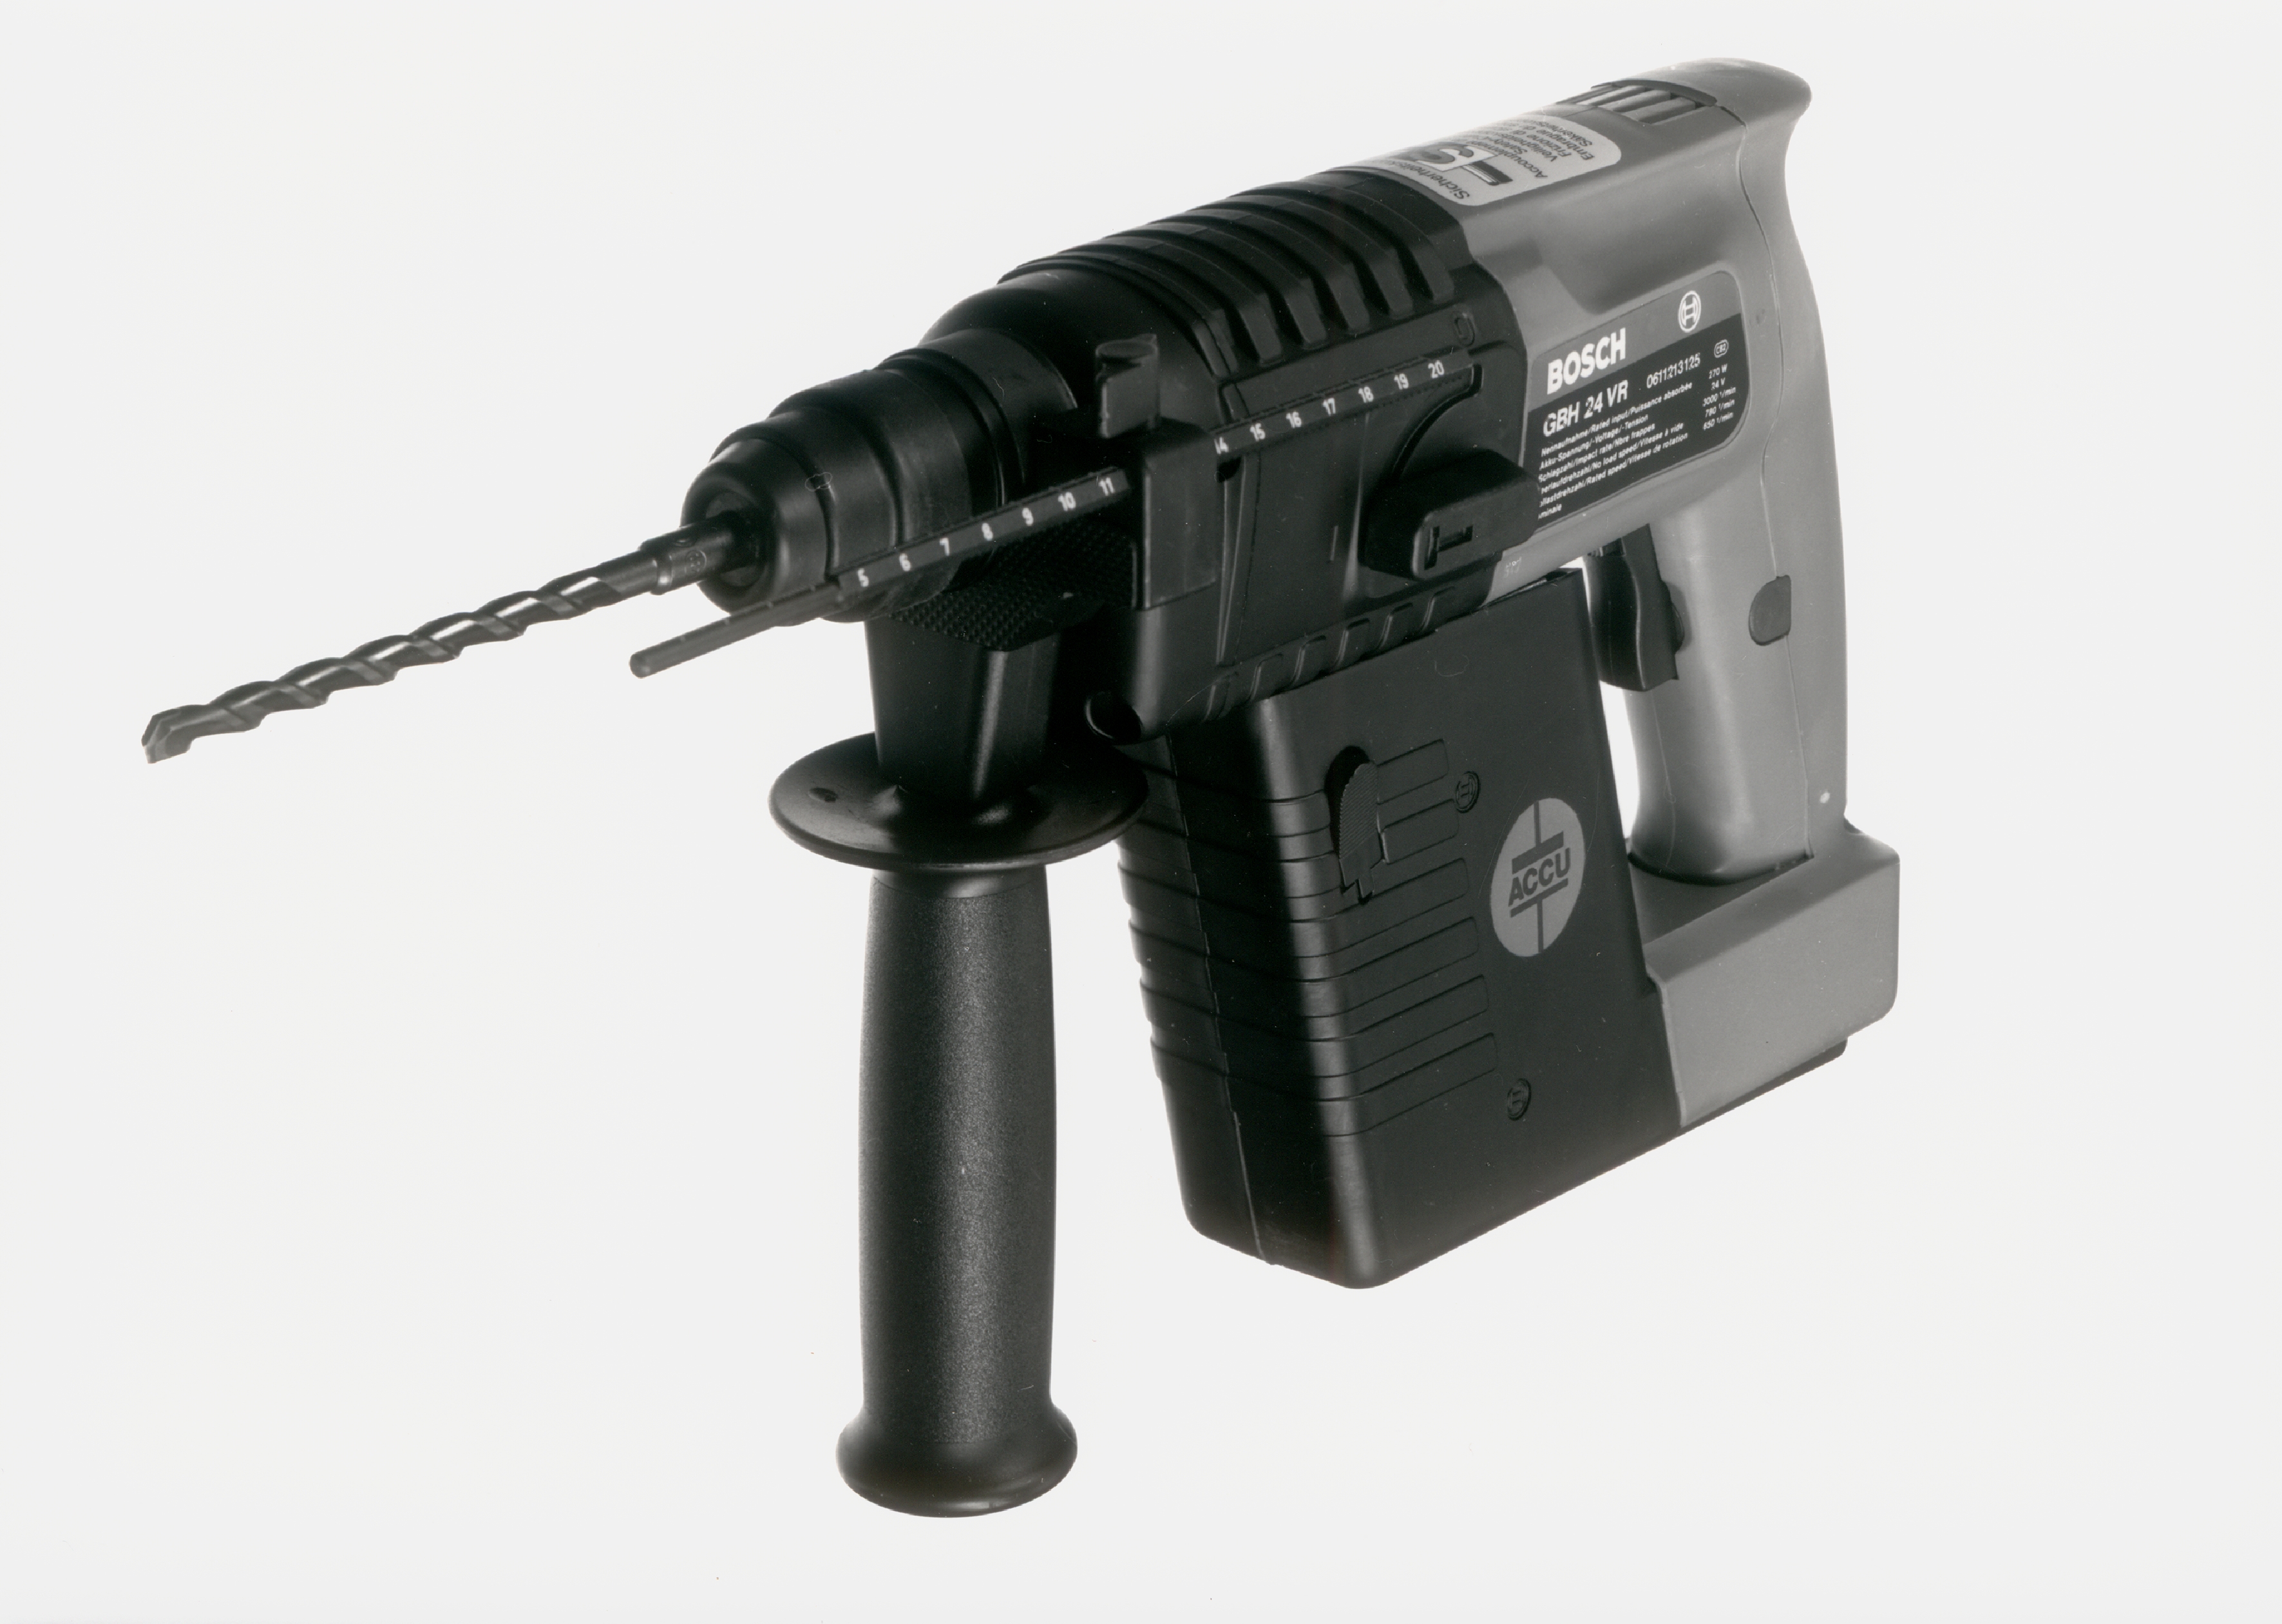 50 years of battery competence at Bosch Power Tools: First professional cordless hammer drill in the world 